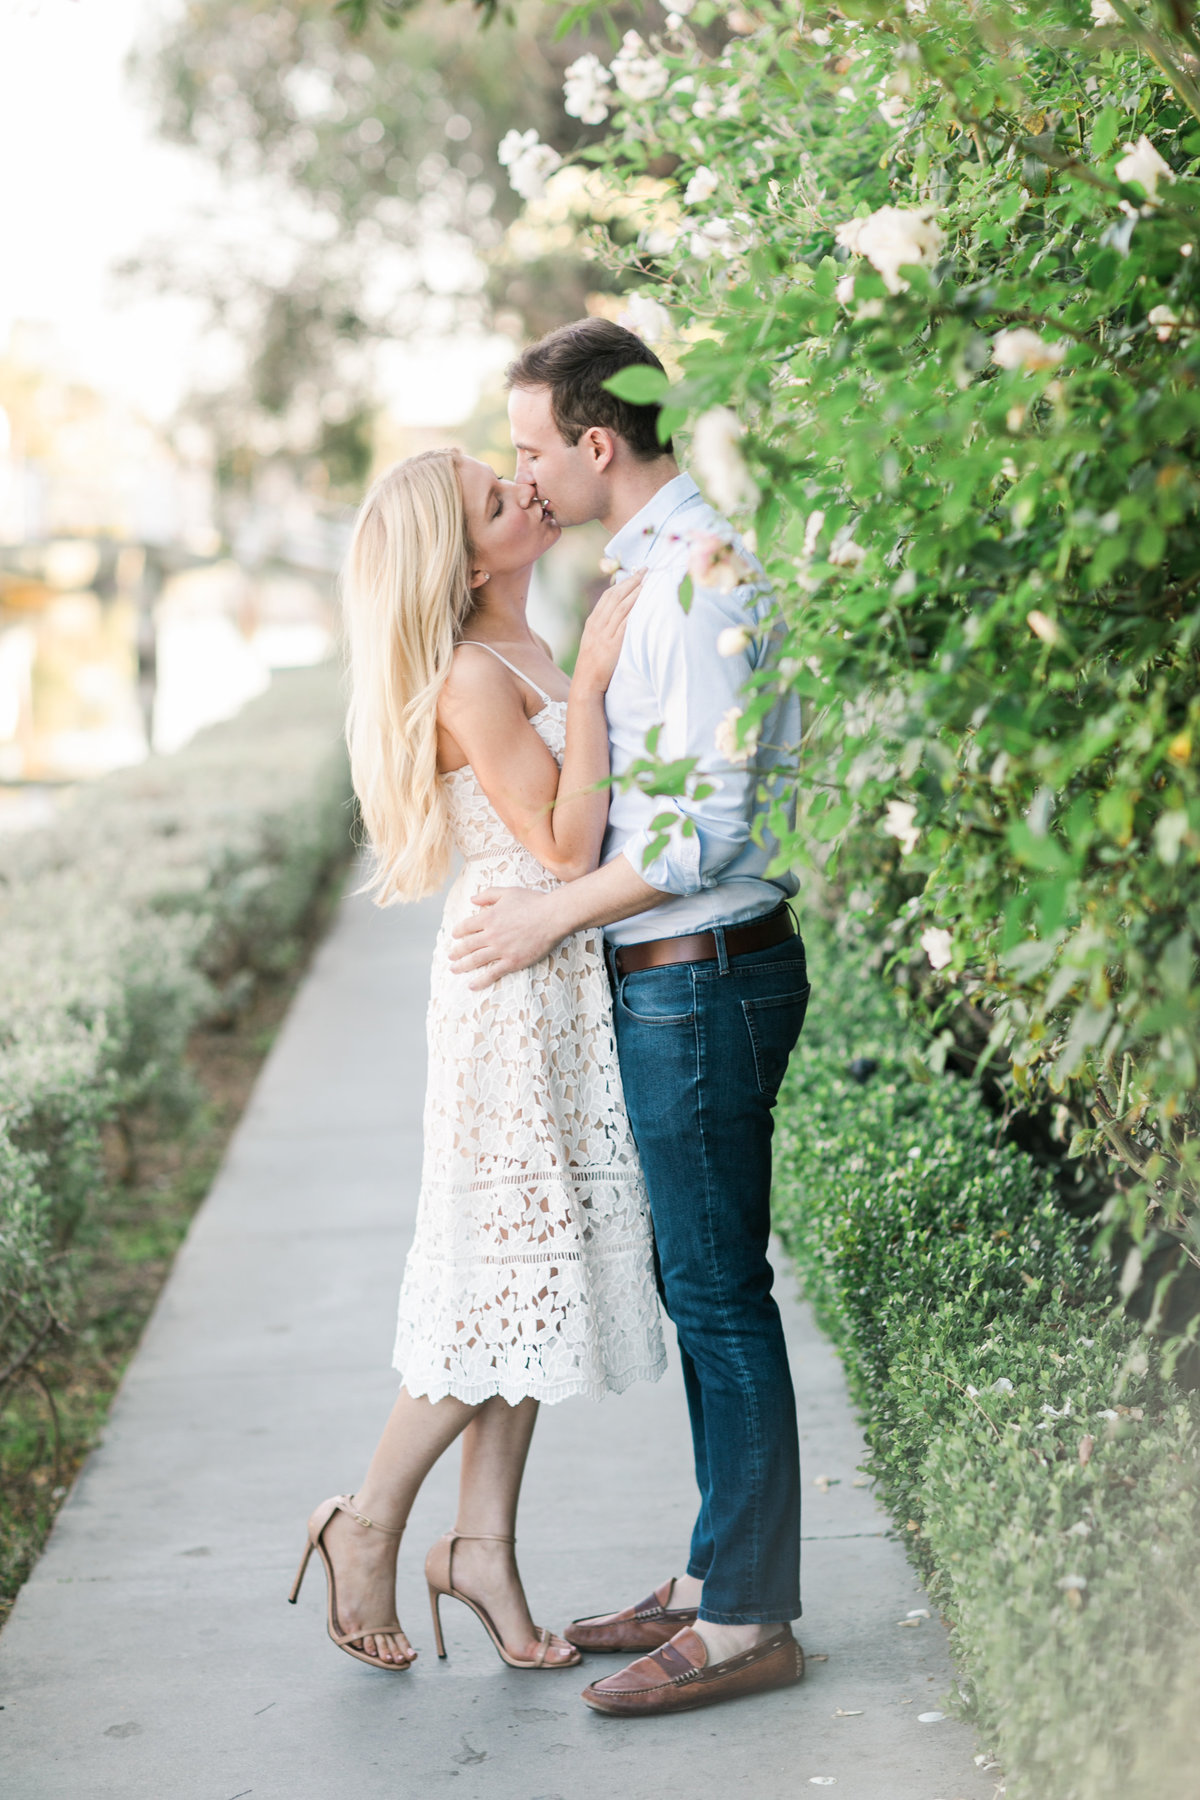 Venice Canal Beach Engagement Session_Valorie Darling Photography-6347